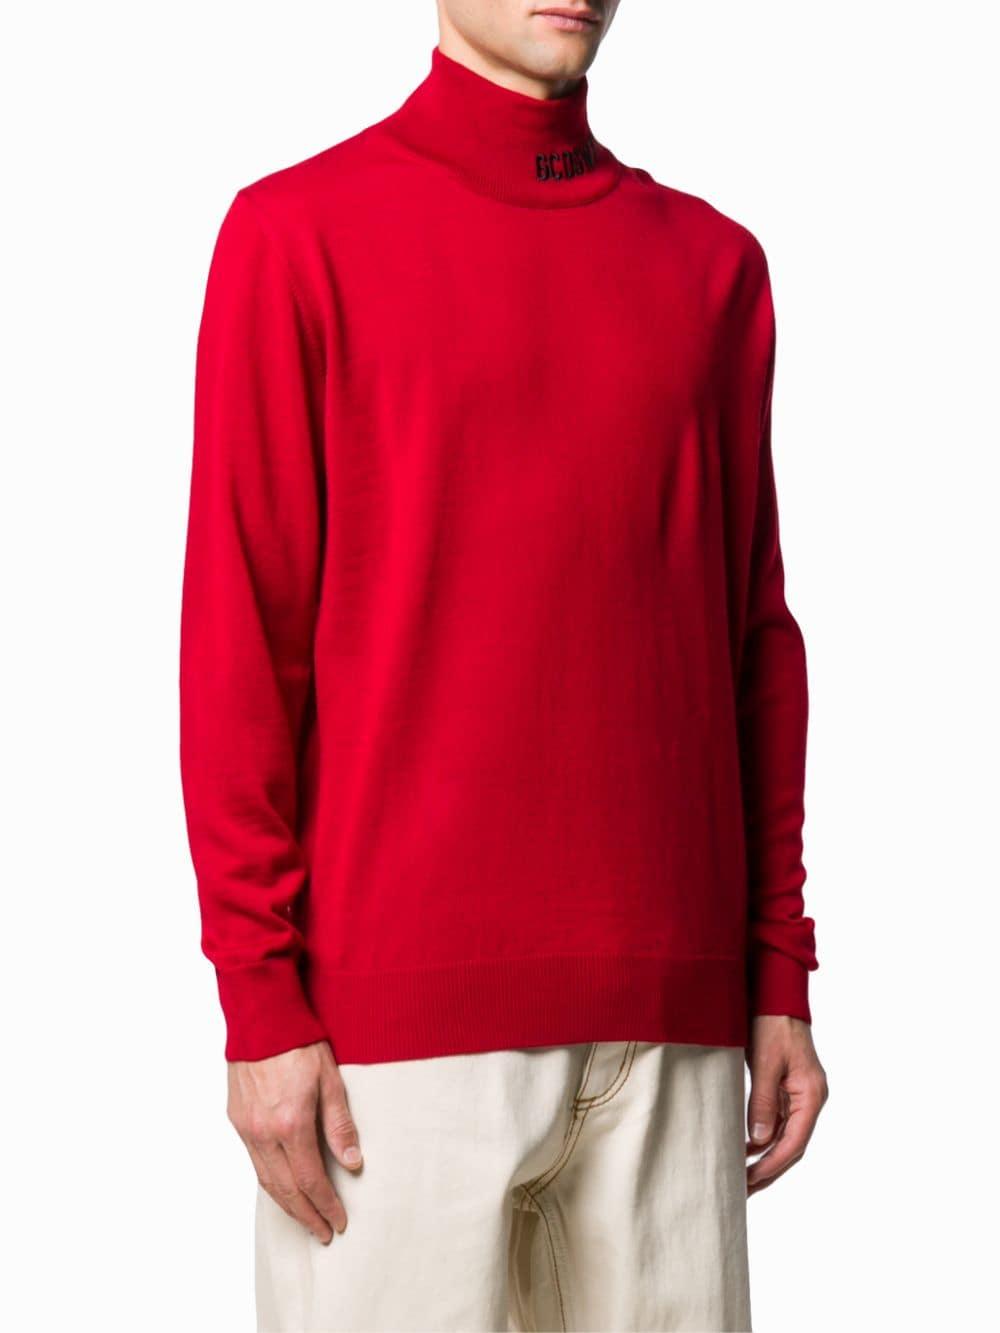 Gcds Wool Turtle Neck Sweater in Red for Men - Save 6% - Lyst